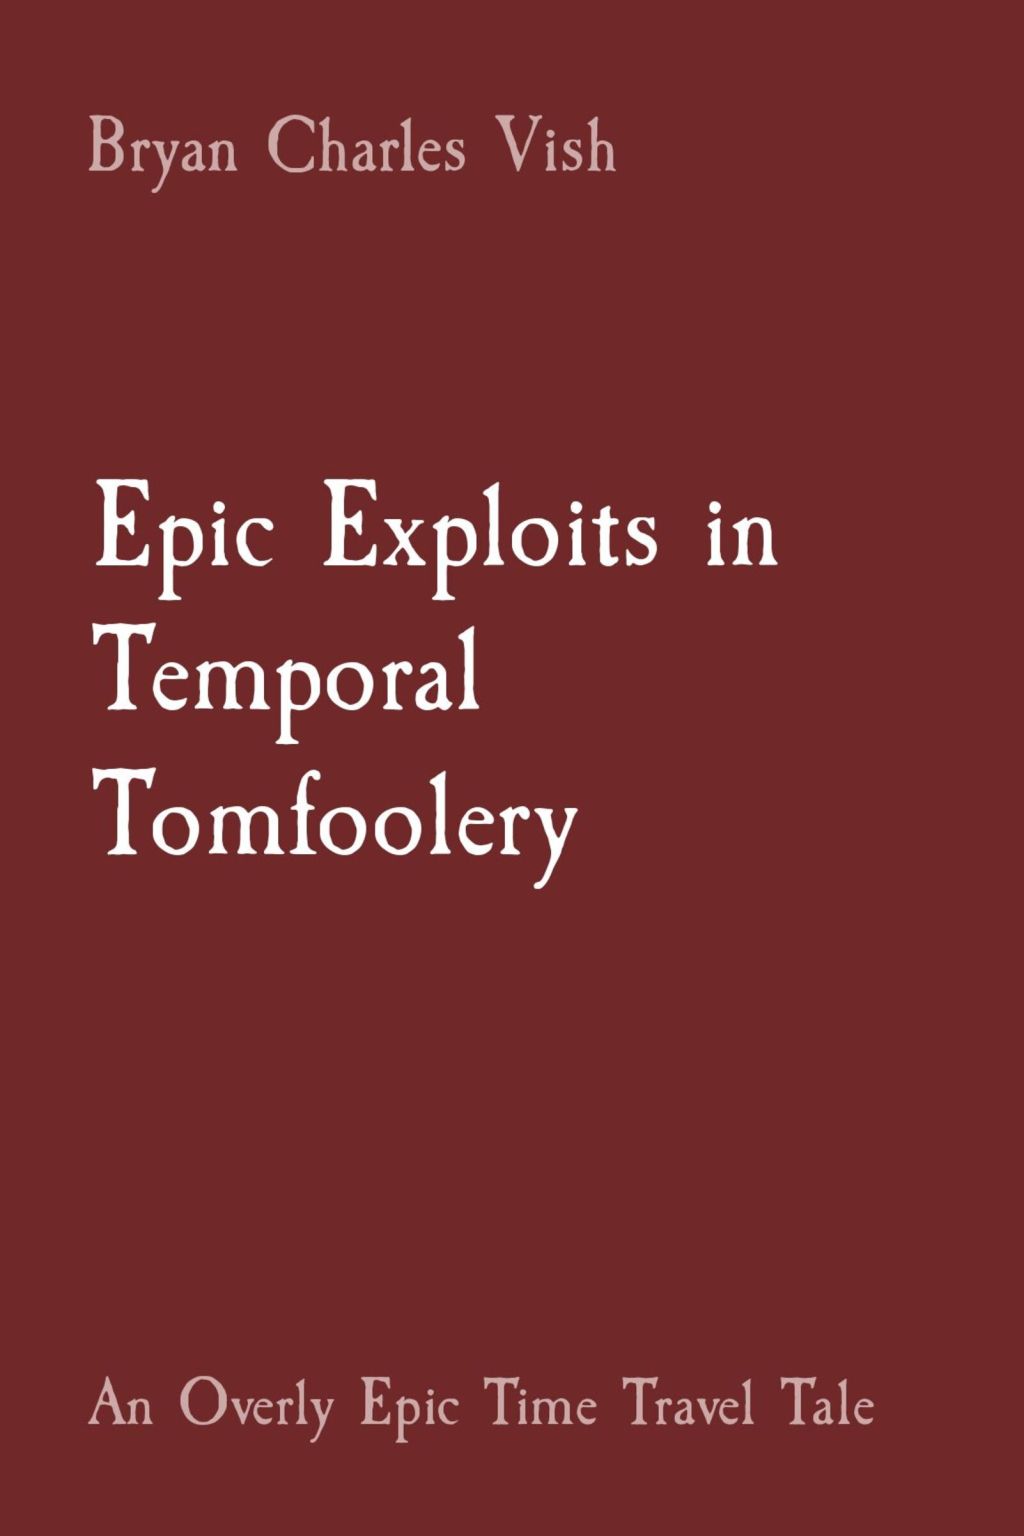 Epic Exploits in Temporal Tomfoolery – A Novel